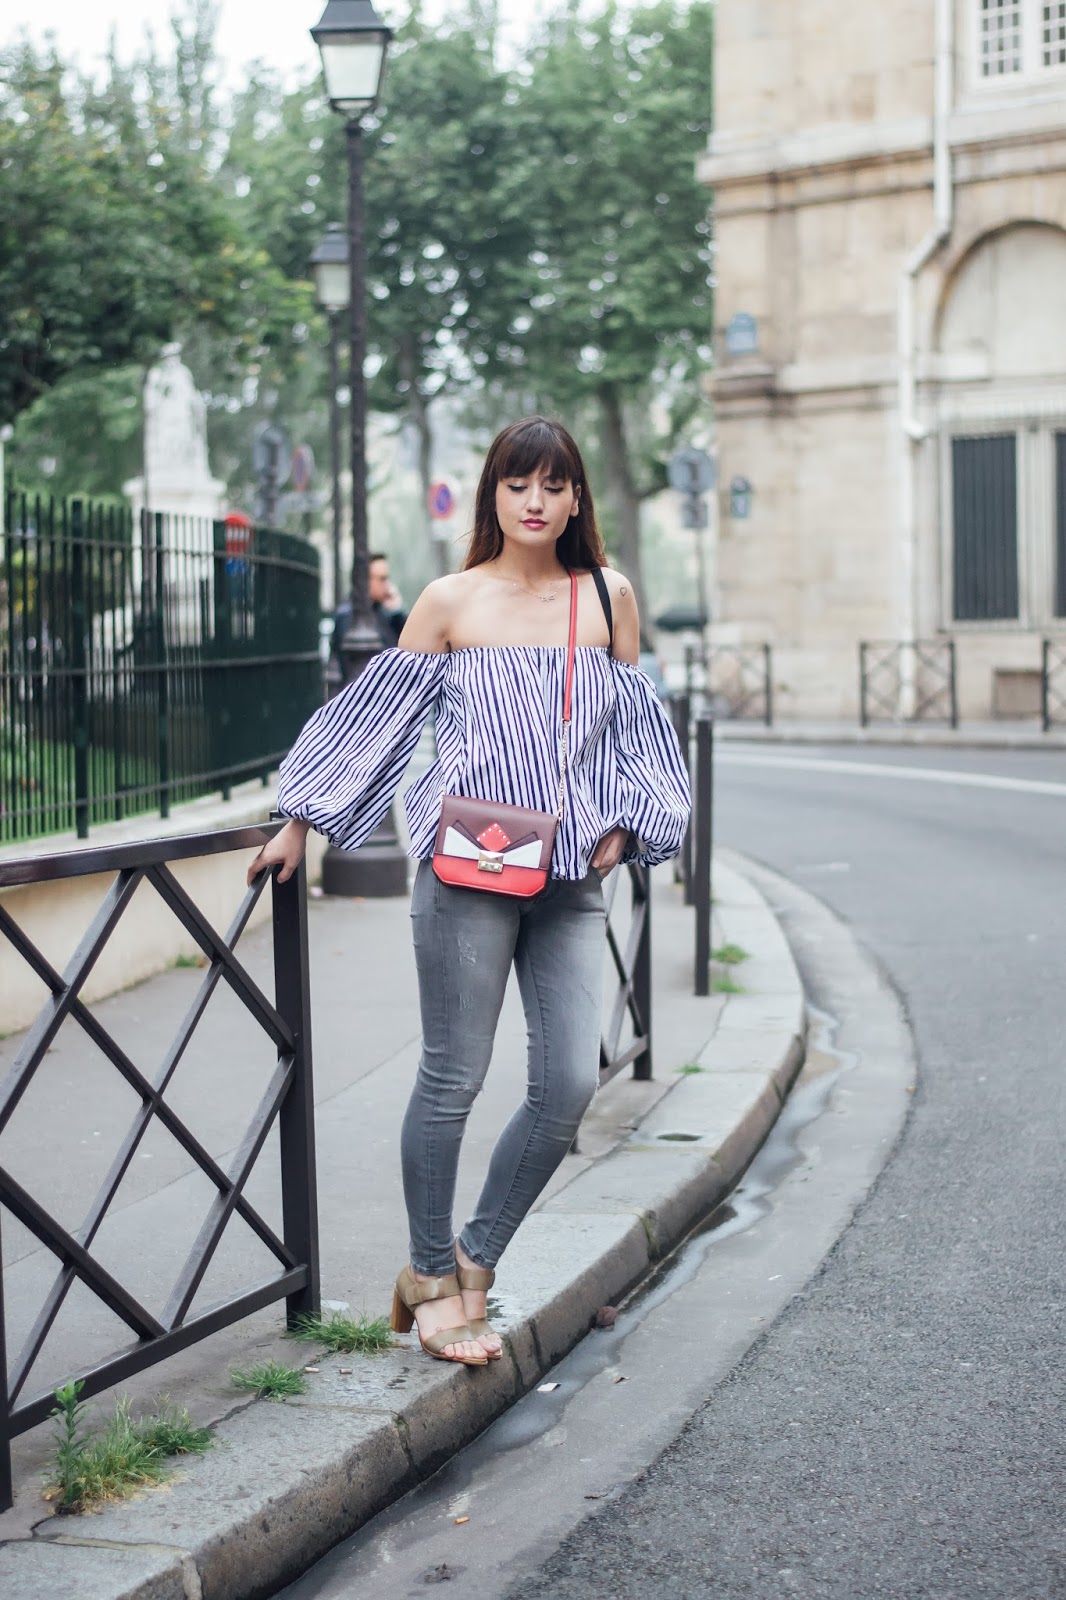 parisian fashion blogger, chic parisian style, look of the day, outfit inspiration, meet me in paree, spring style